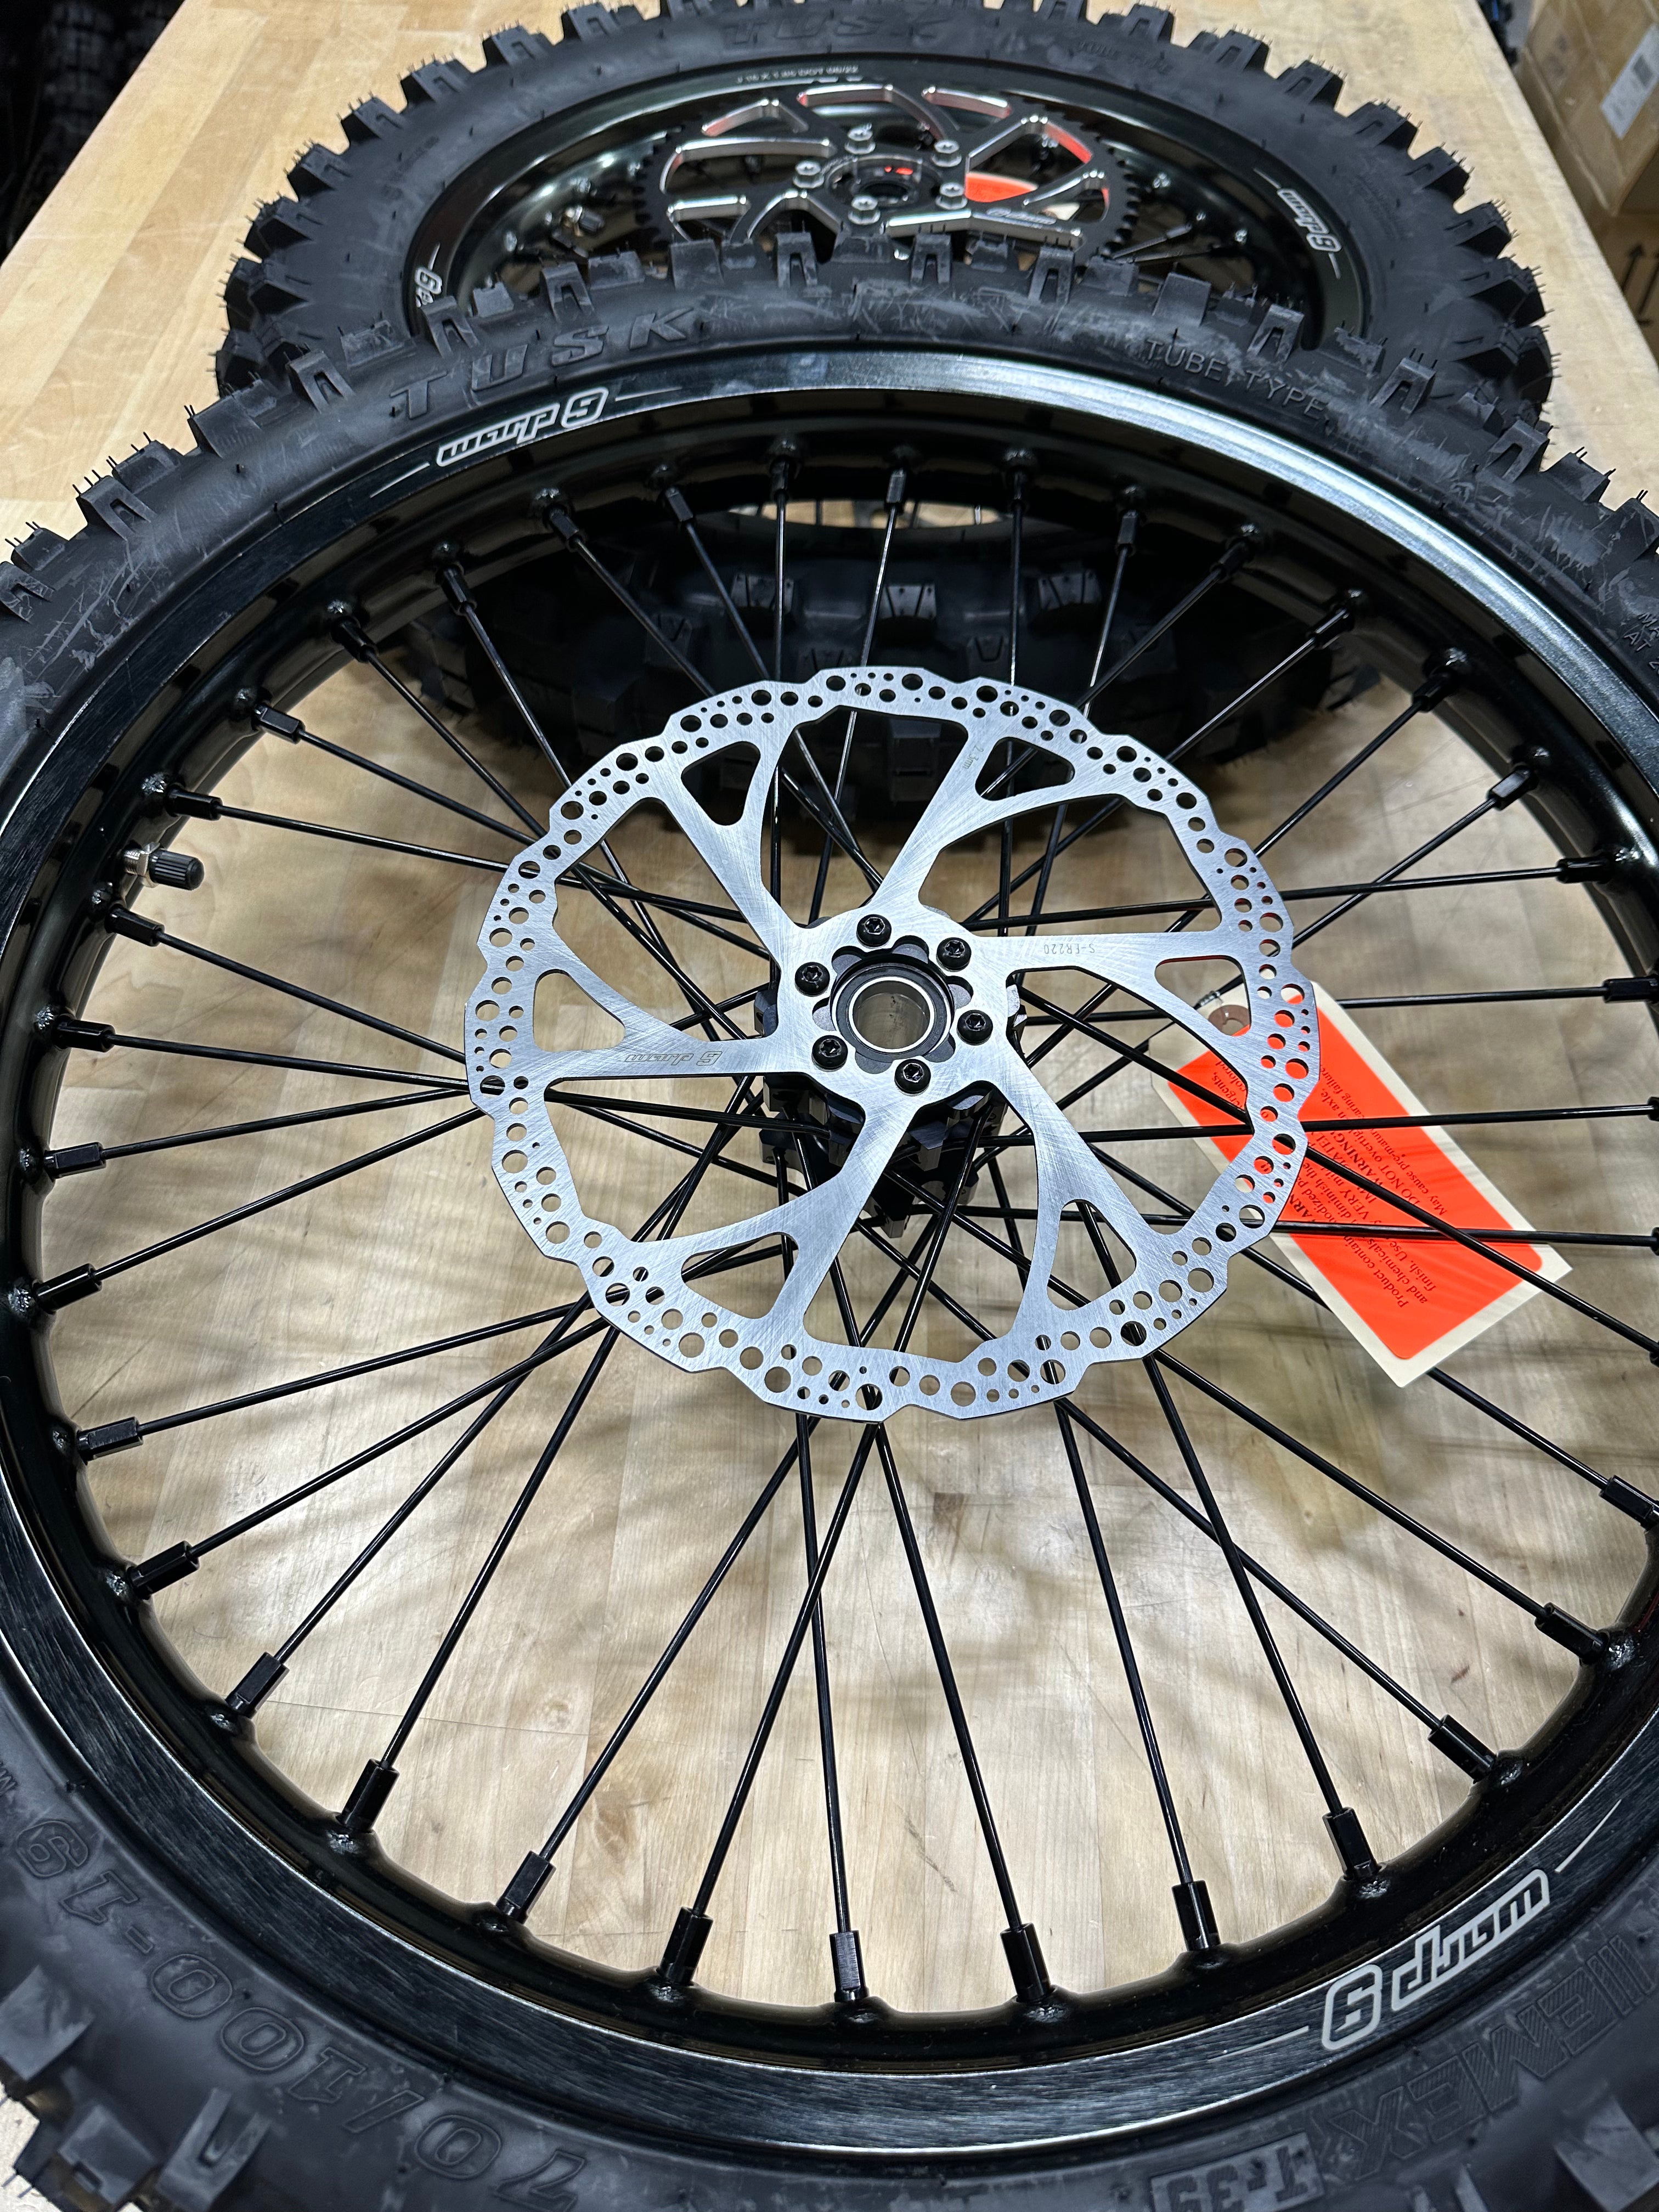 Surron Light Bee Wheelsets with Tires Mounted - ready to ship immediately!